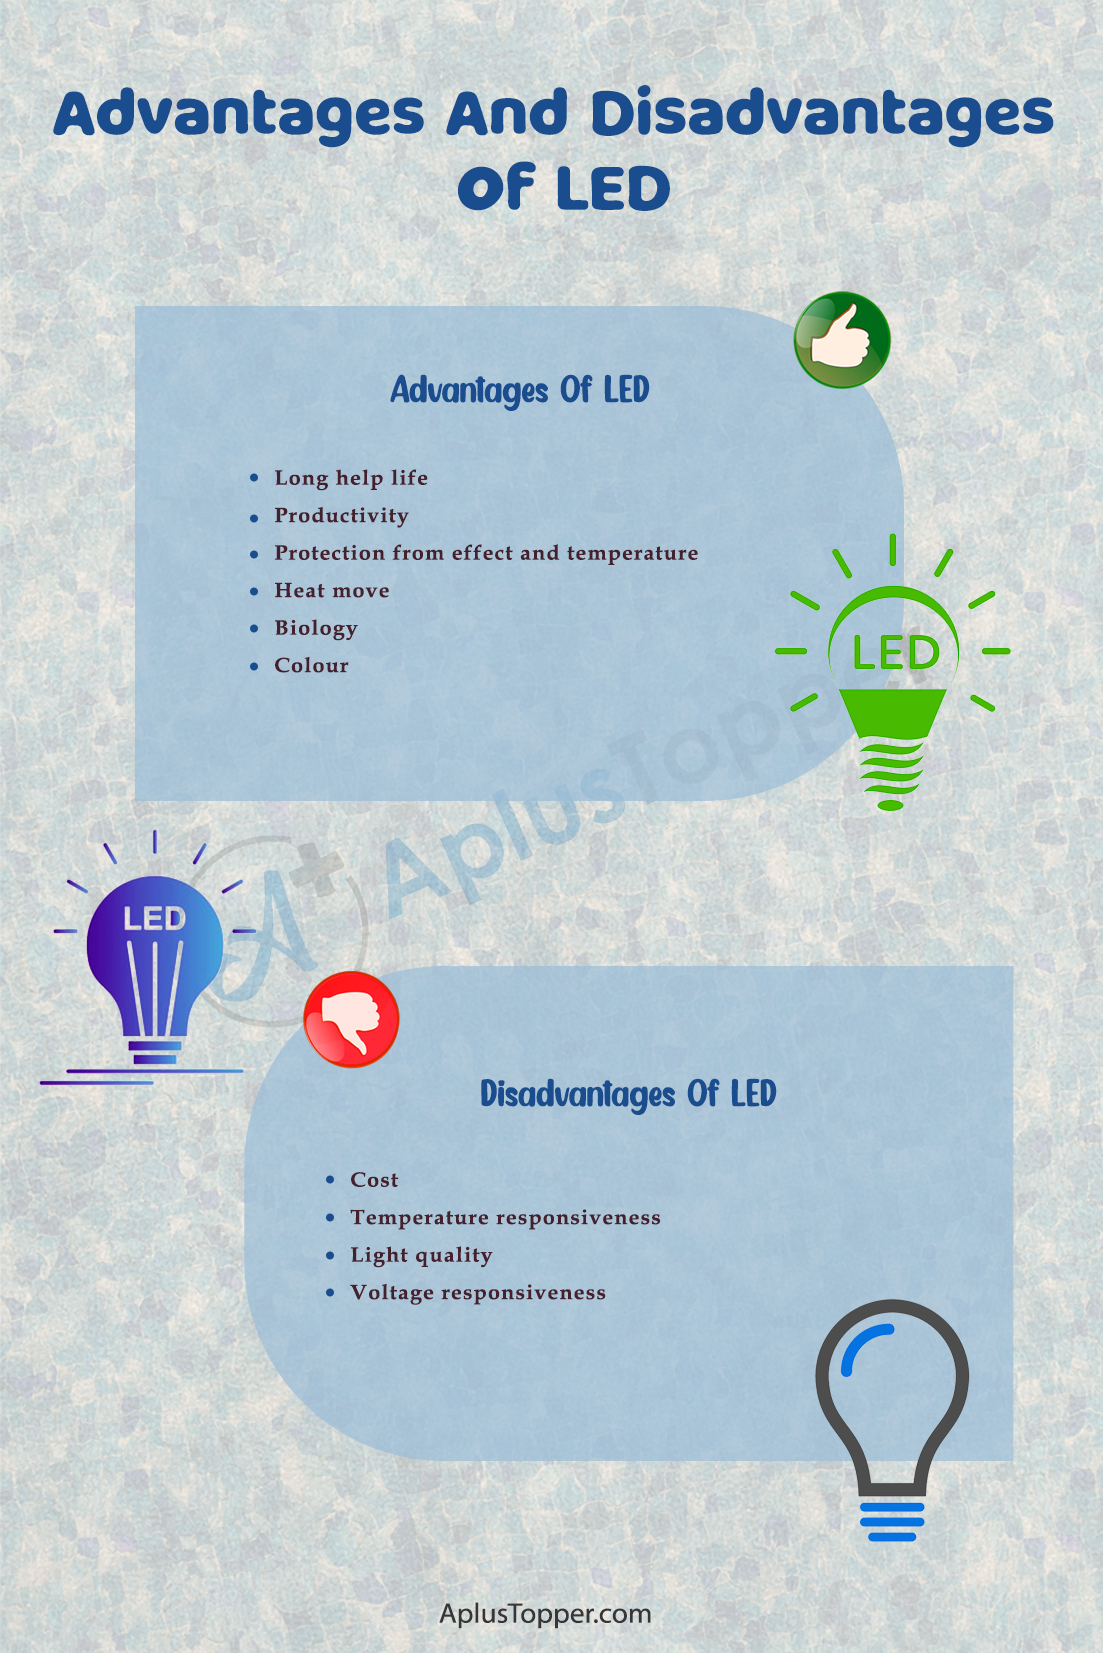 What are disadvantages of LED?